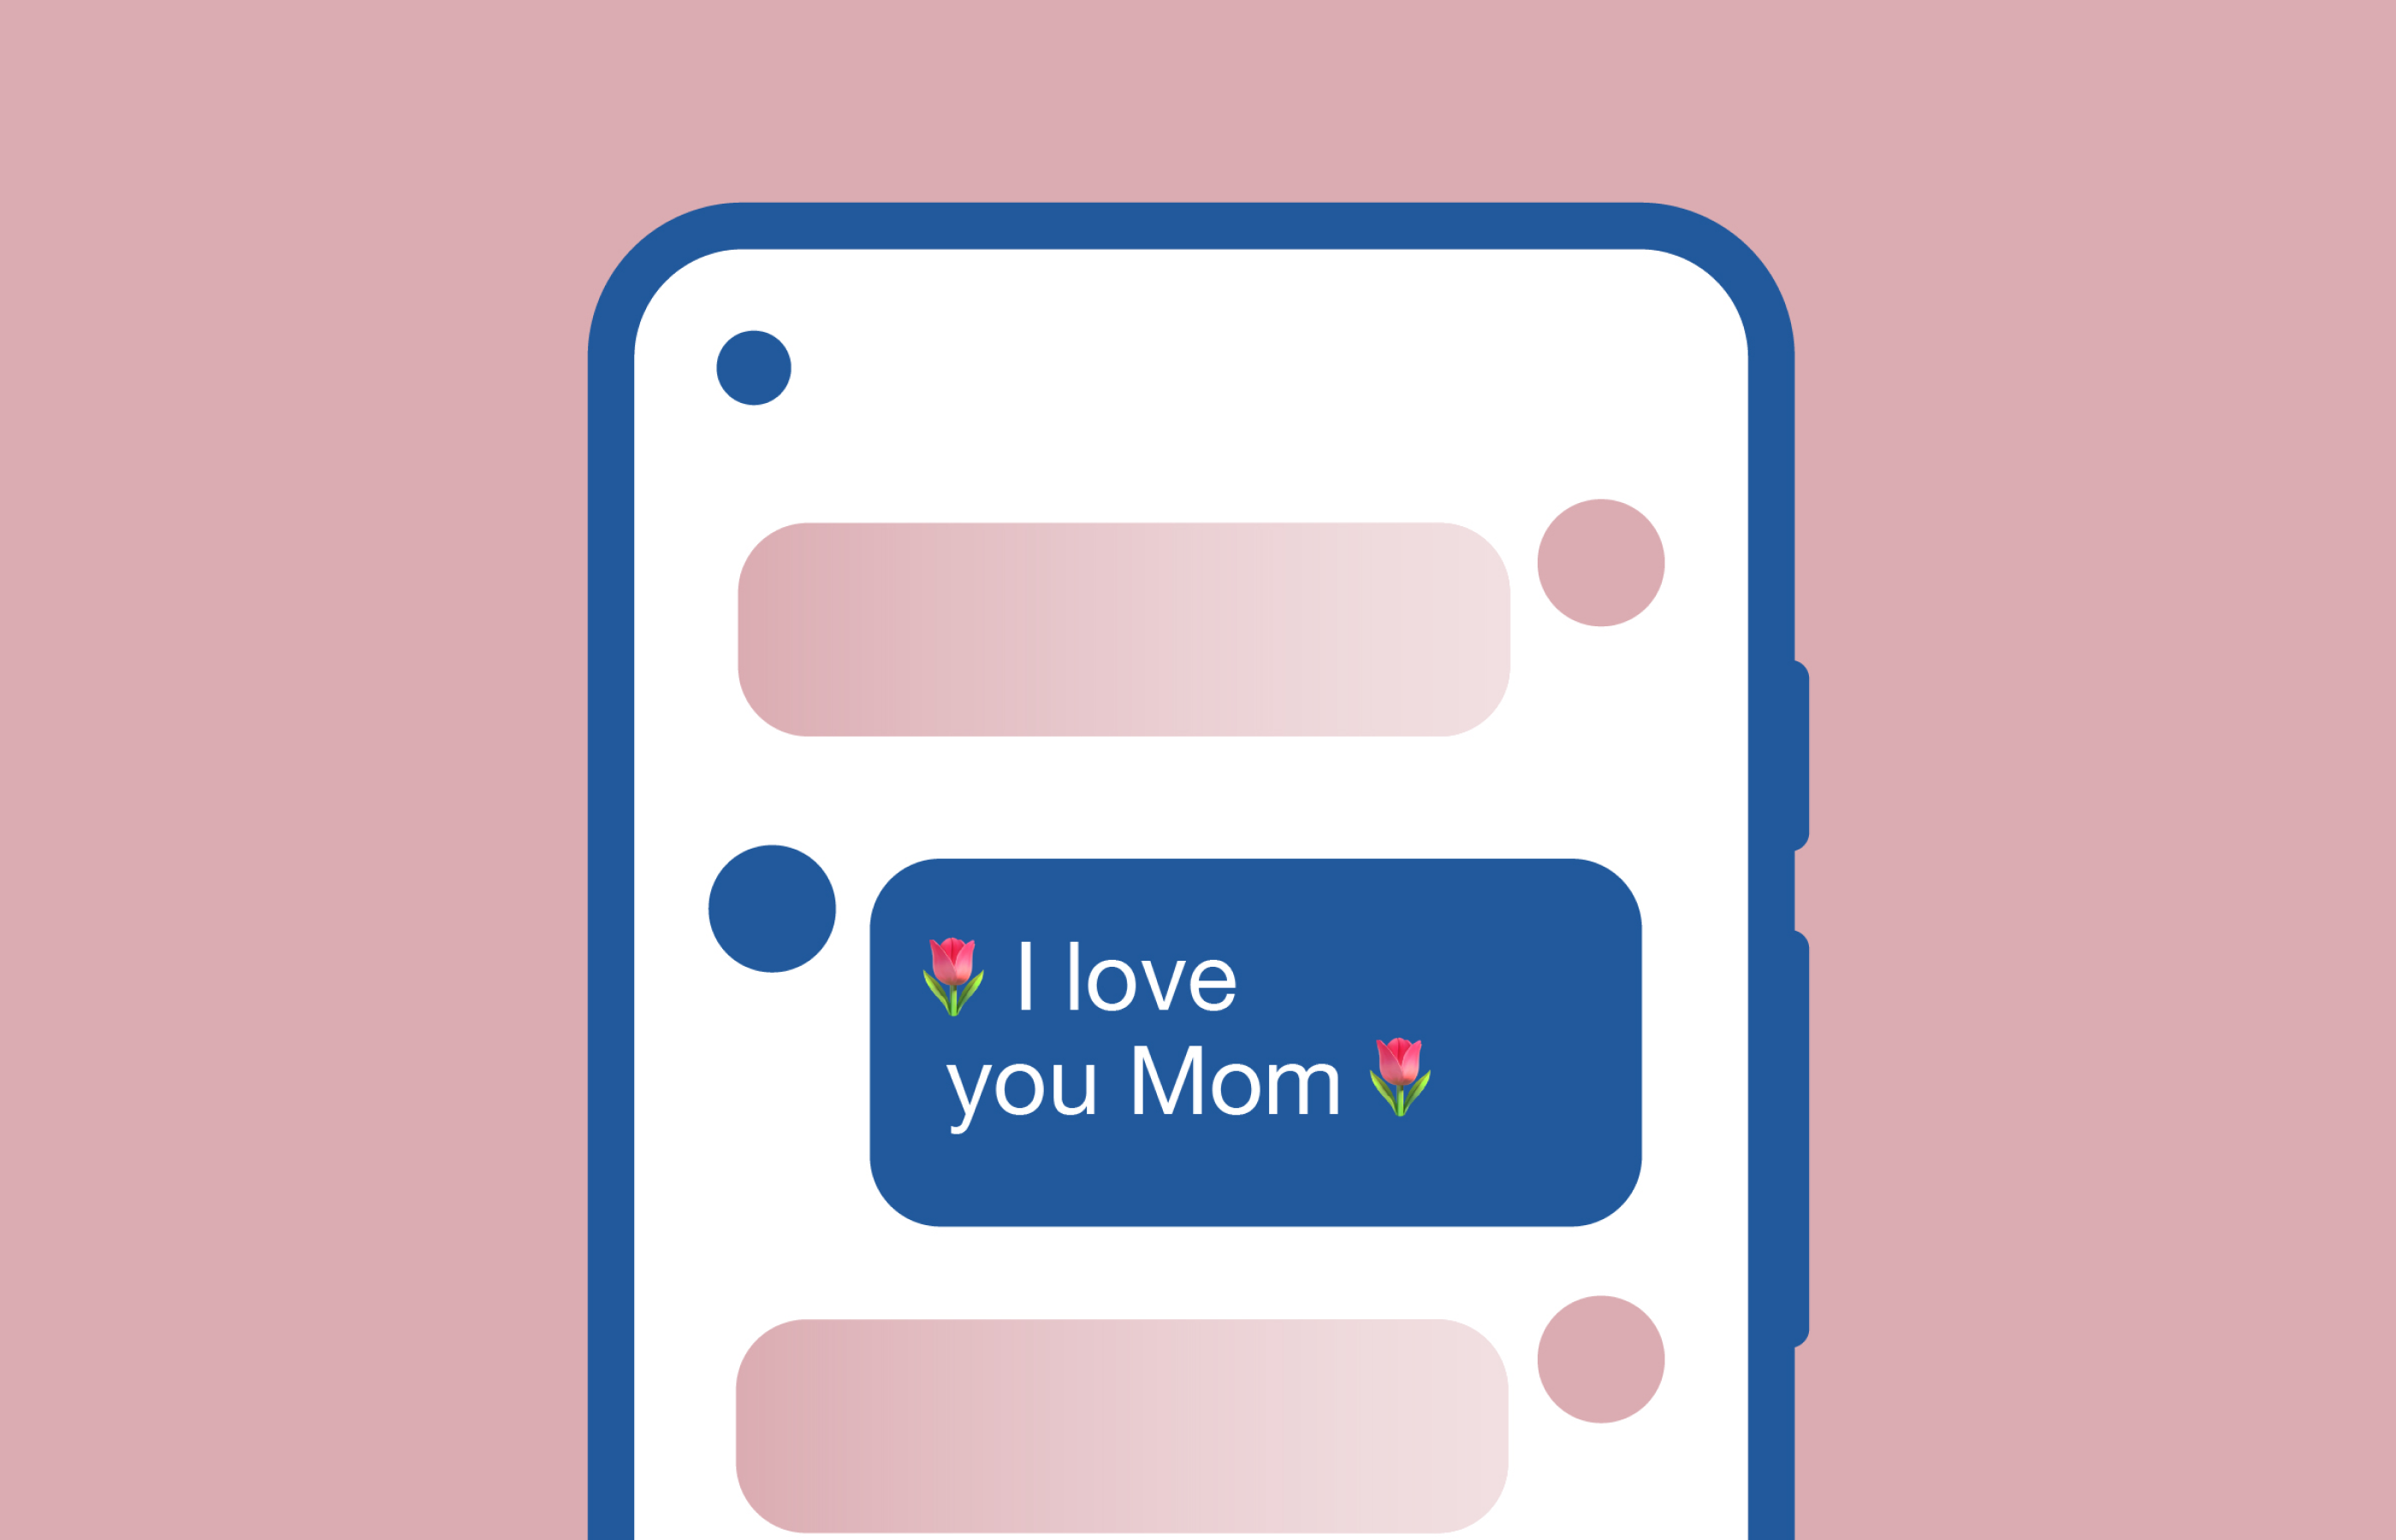 Illustrated cell phone with text message bubble saying "I love you Mom"